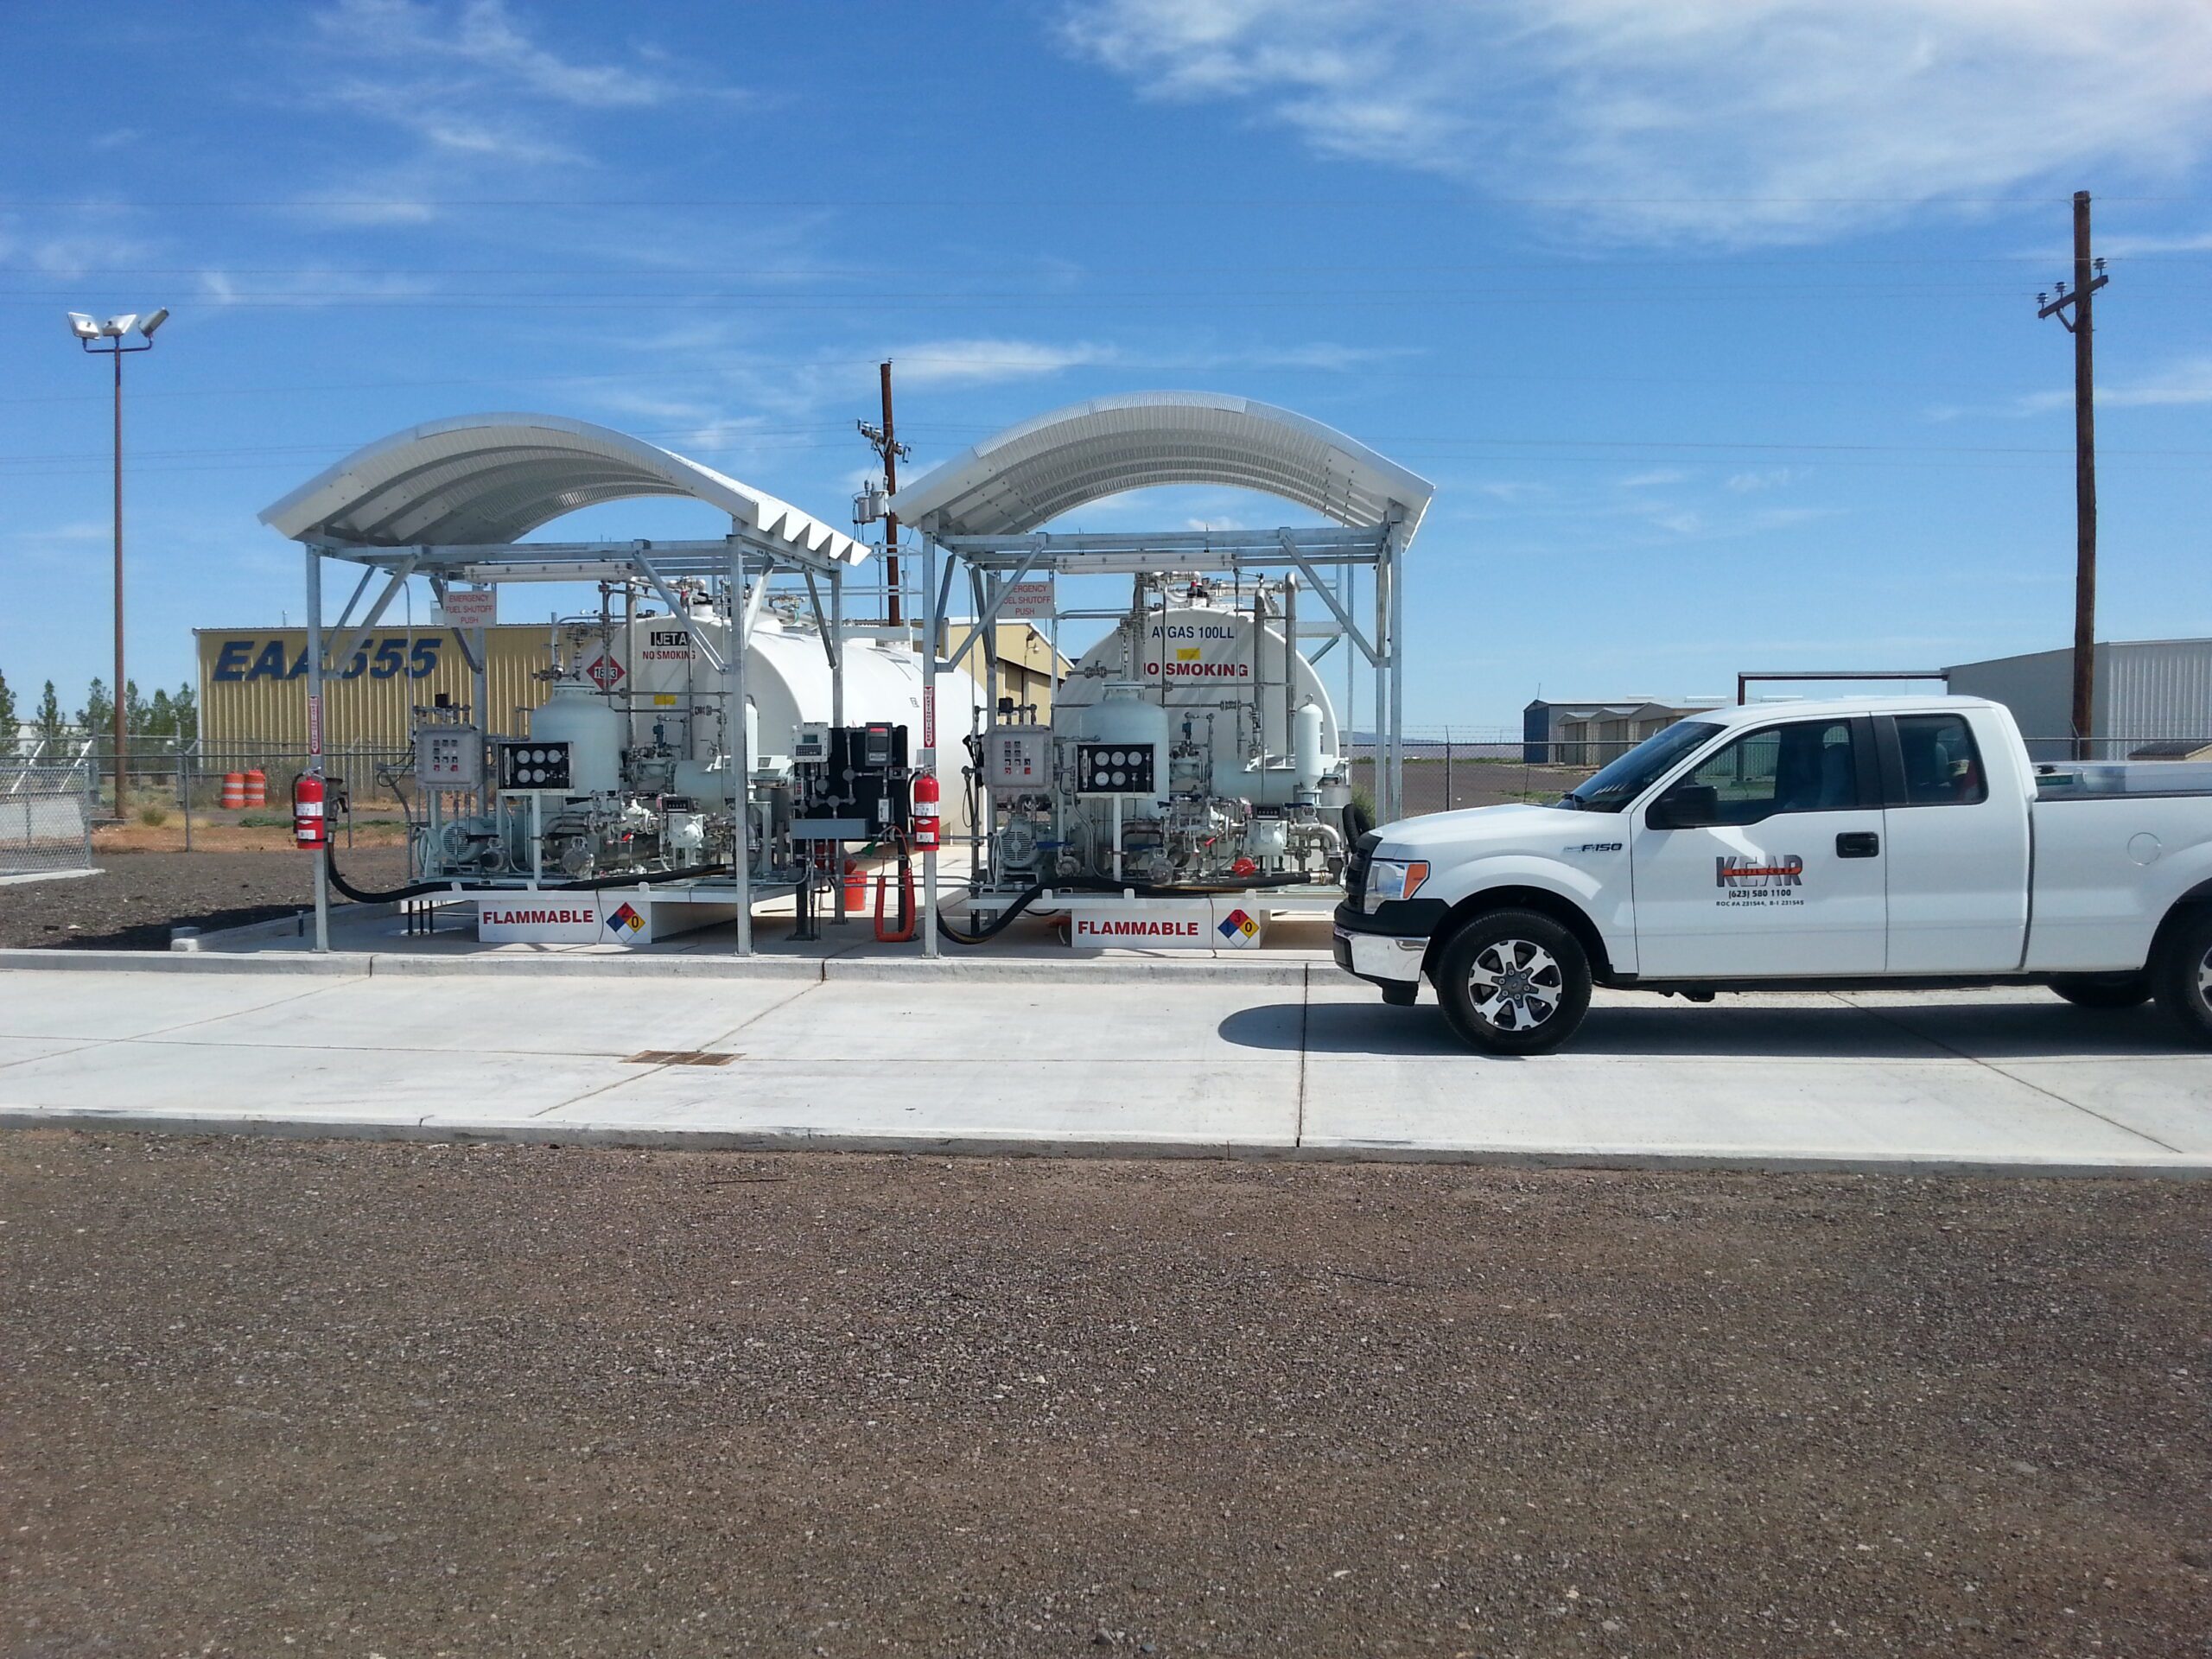 A white pickup truck parked at the New Mexico Fuel Farm with multiple pumps under canopies, displaying various flammable signs.